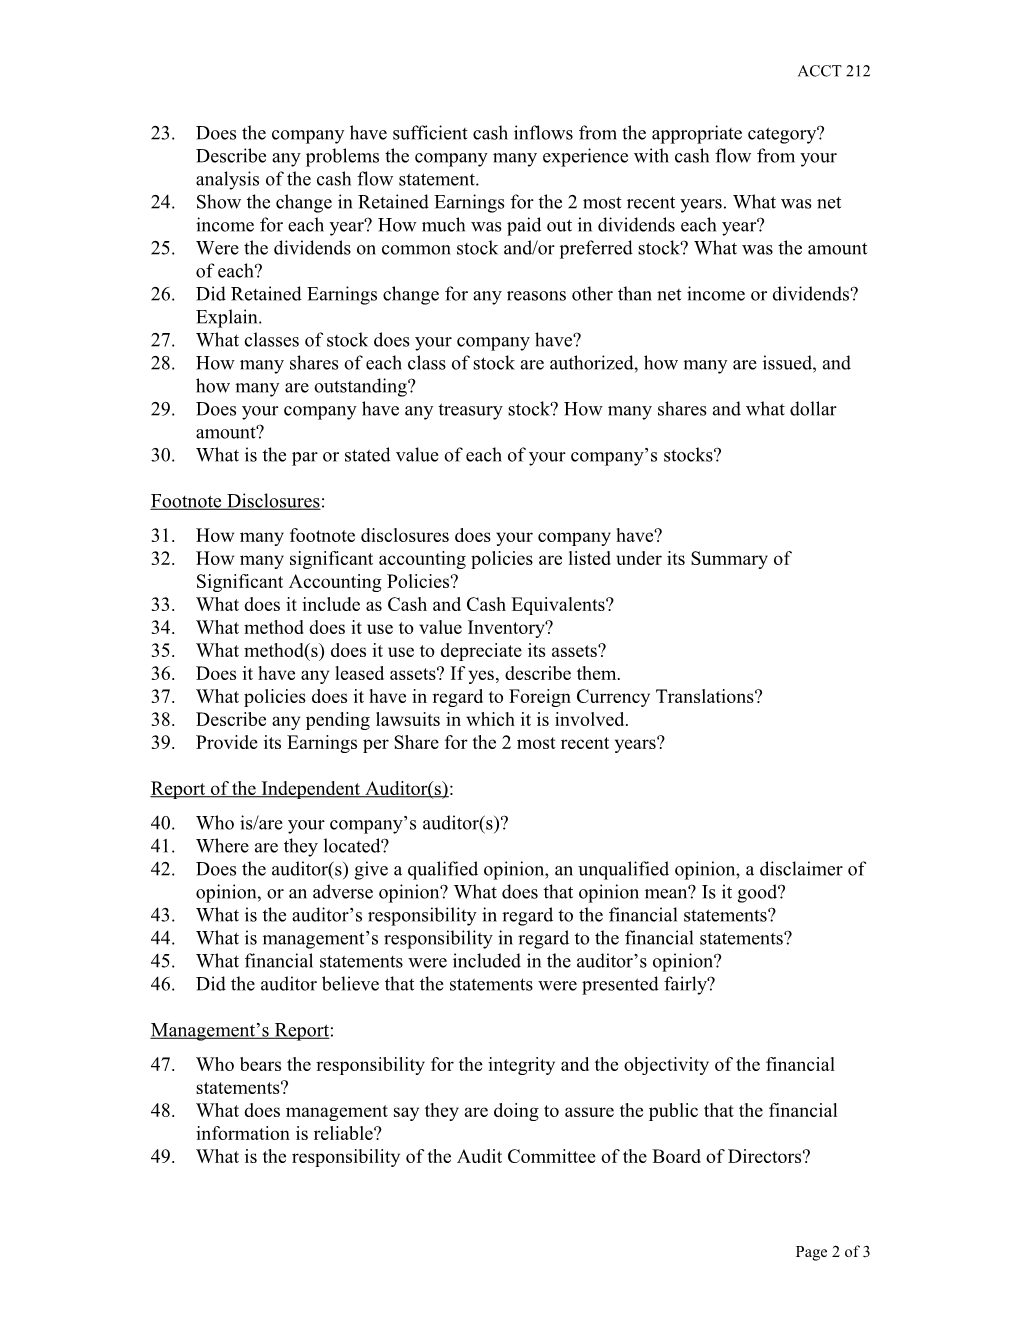 Individual Learning 55 Question Form